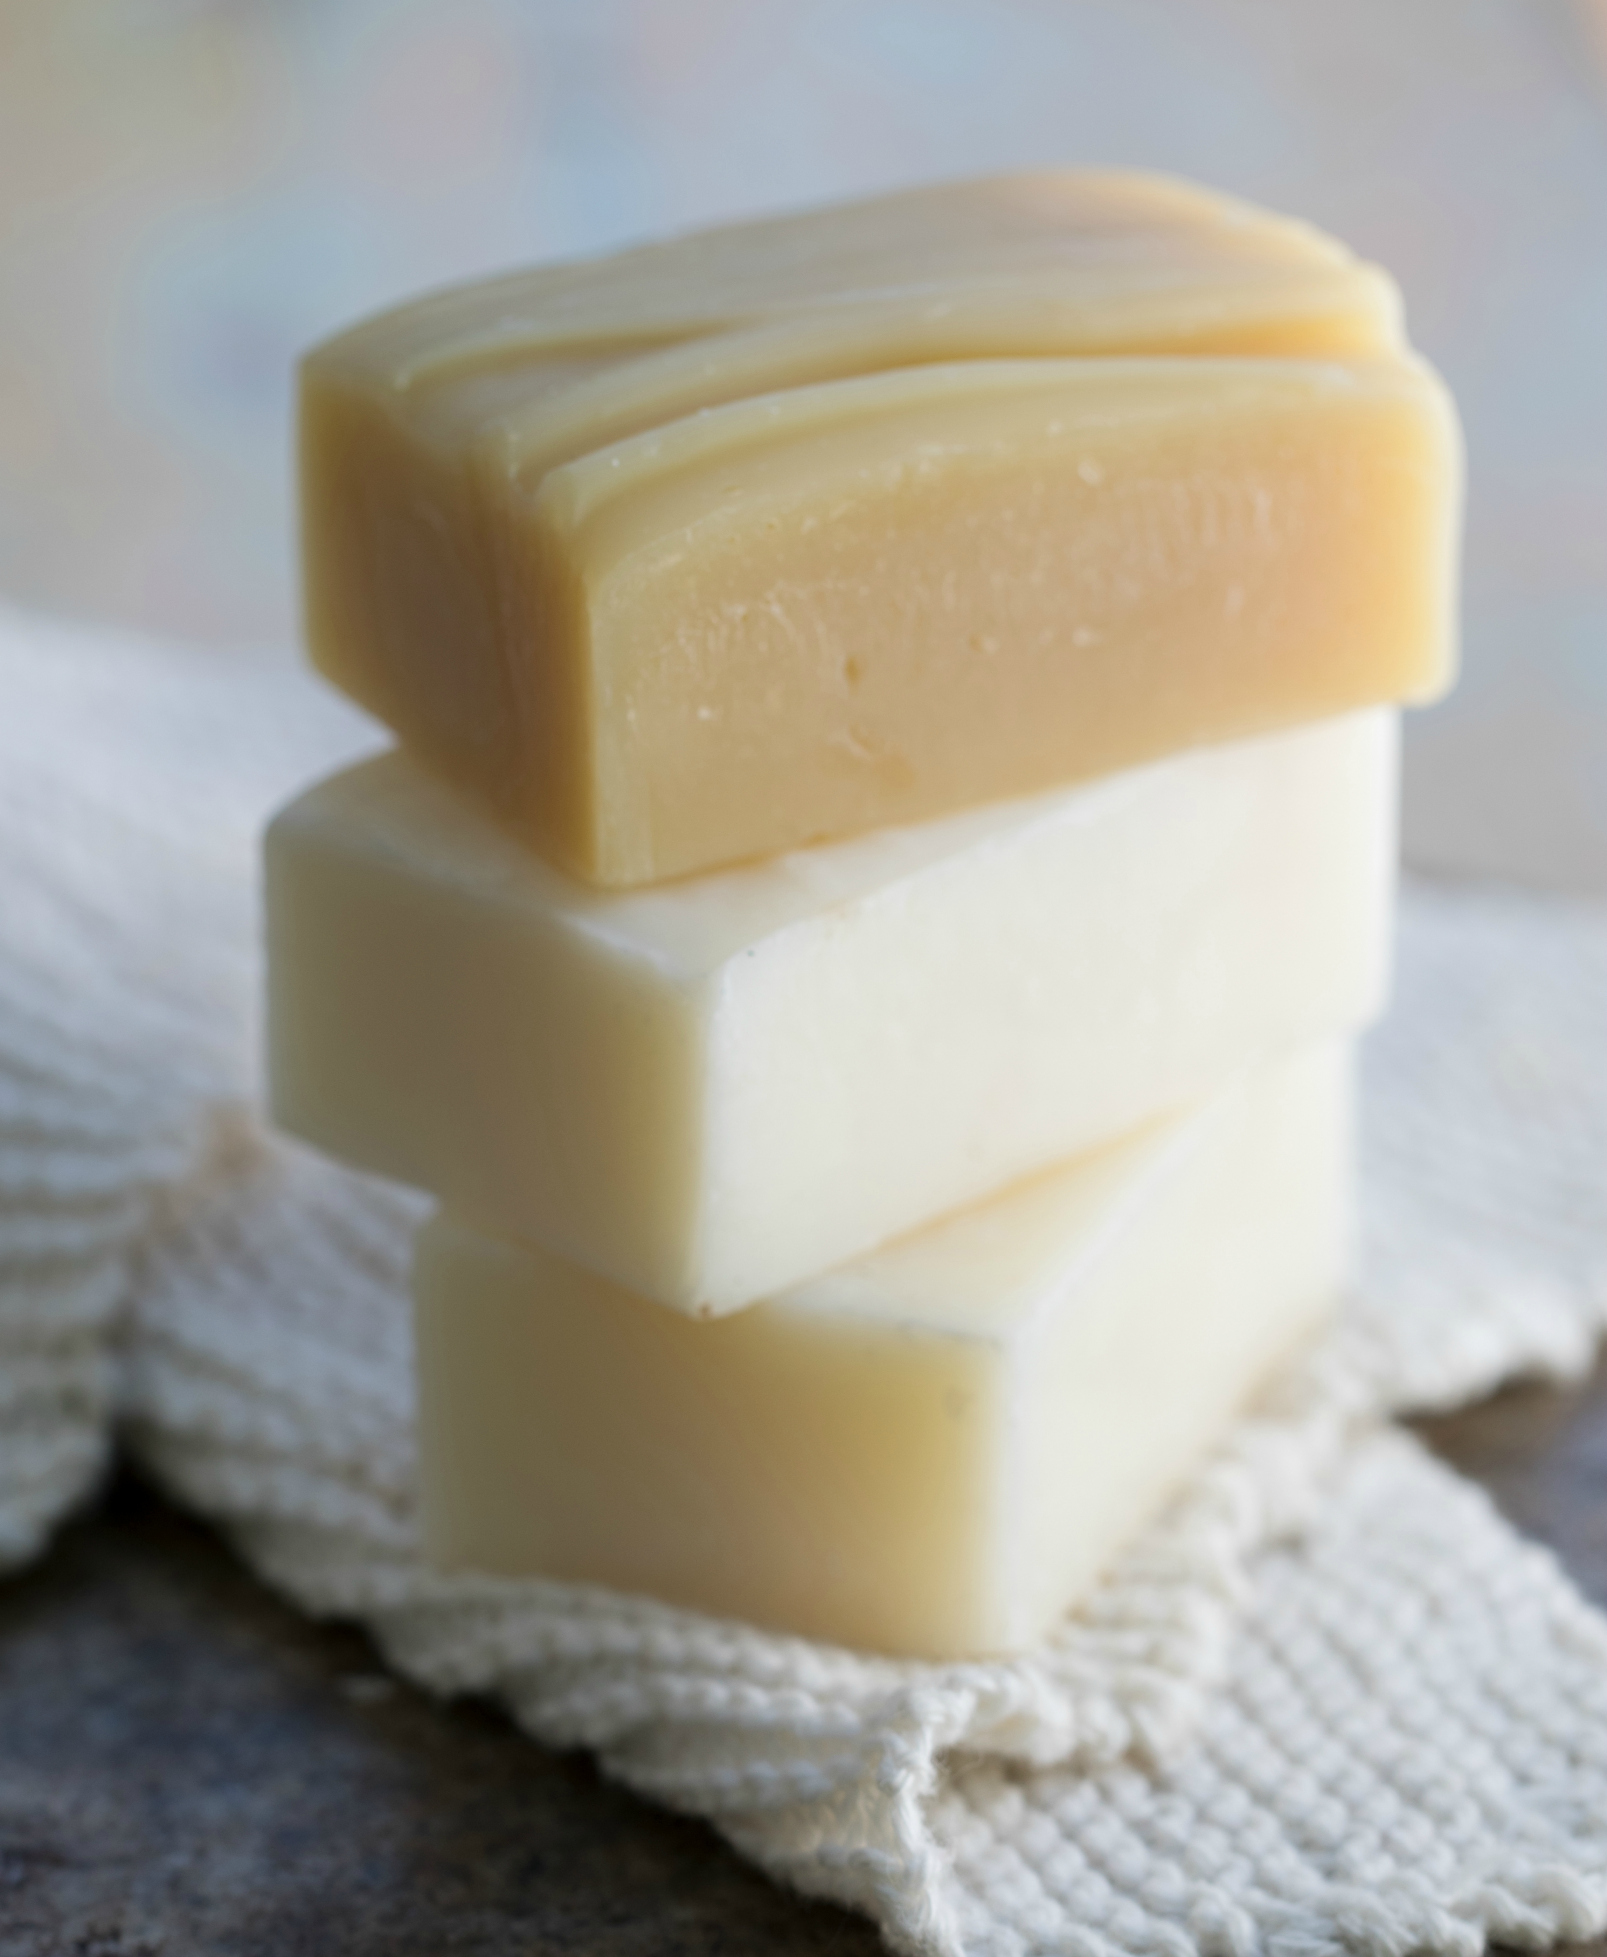 Goats Milk and Honey Soap Recipe for